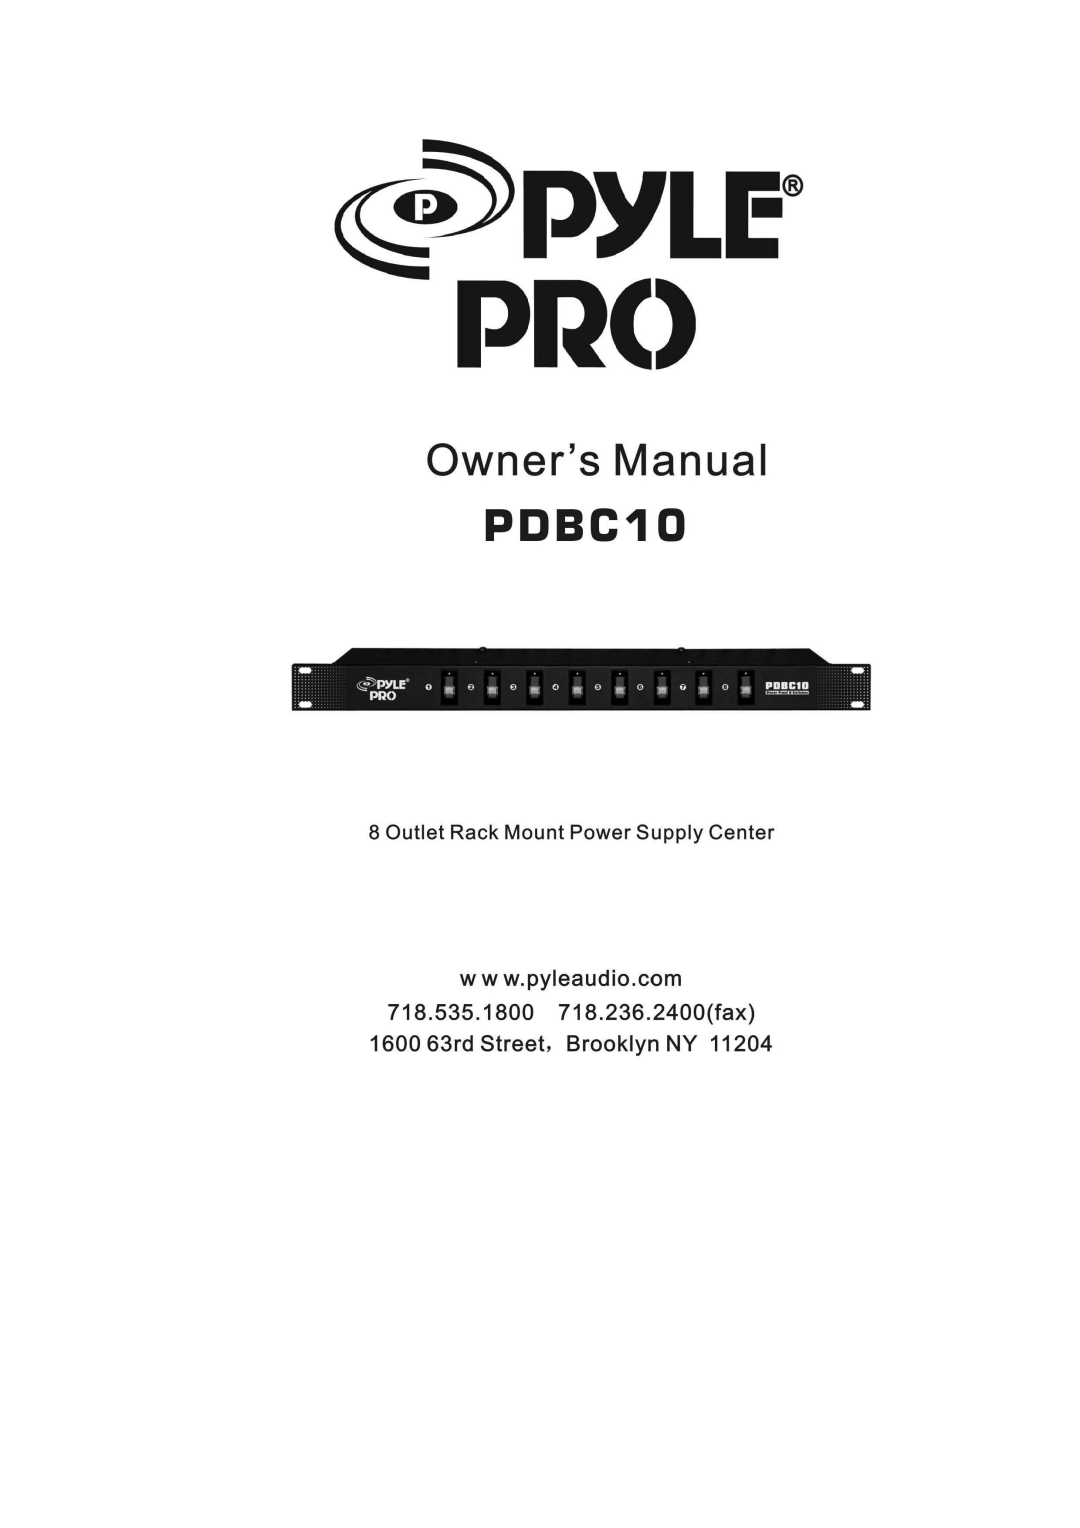 PYLE Audio PDBC10 owner manual ~~~E·, OwnersManual, 718.535.1800 718.236.2400fax 1600 63rd Street, Brooklyn NY, Pdbcid 